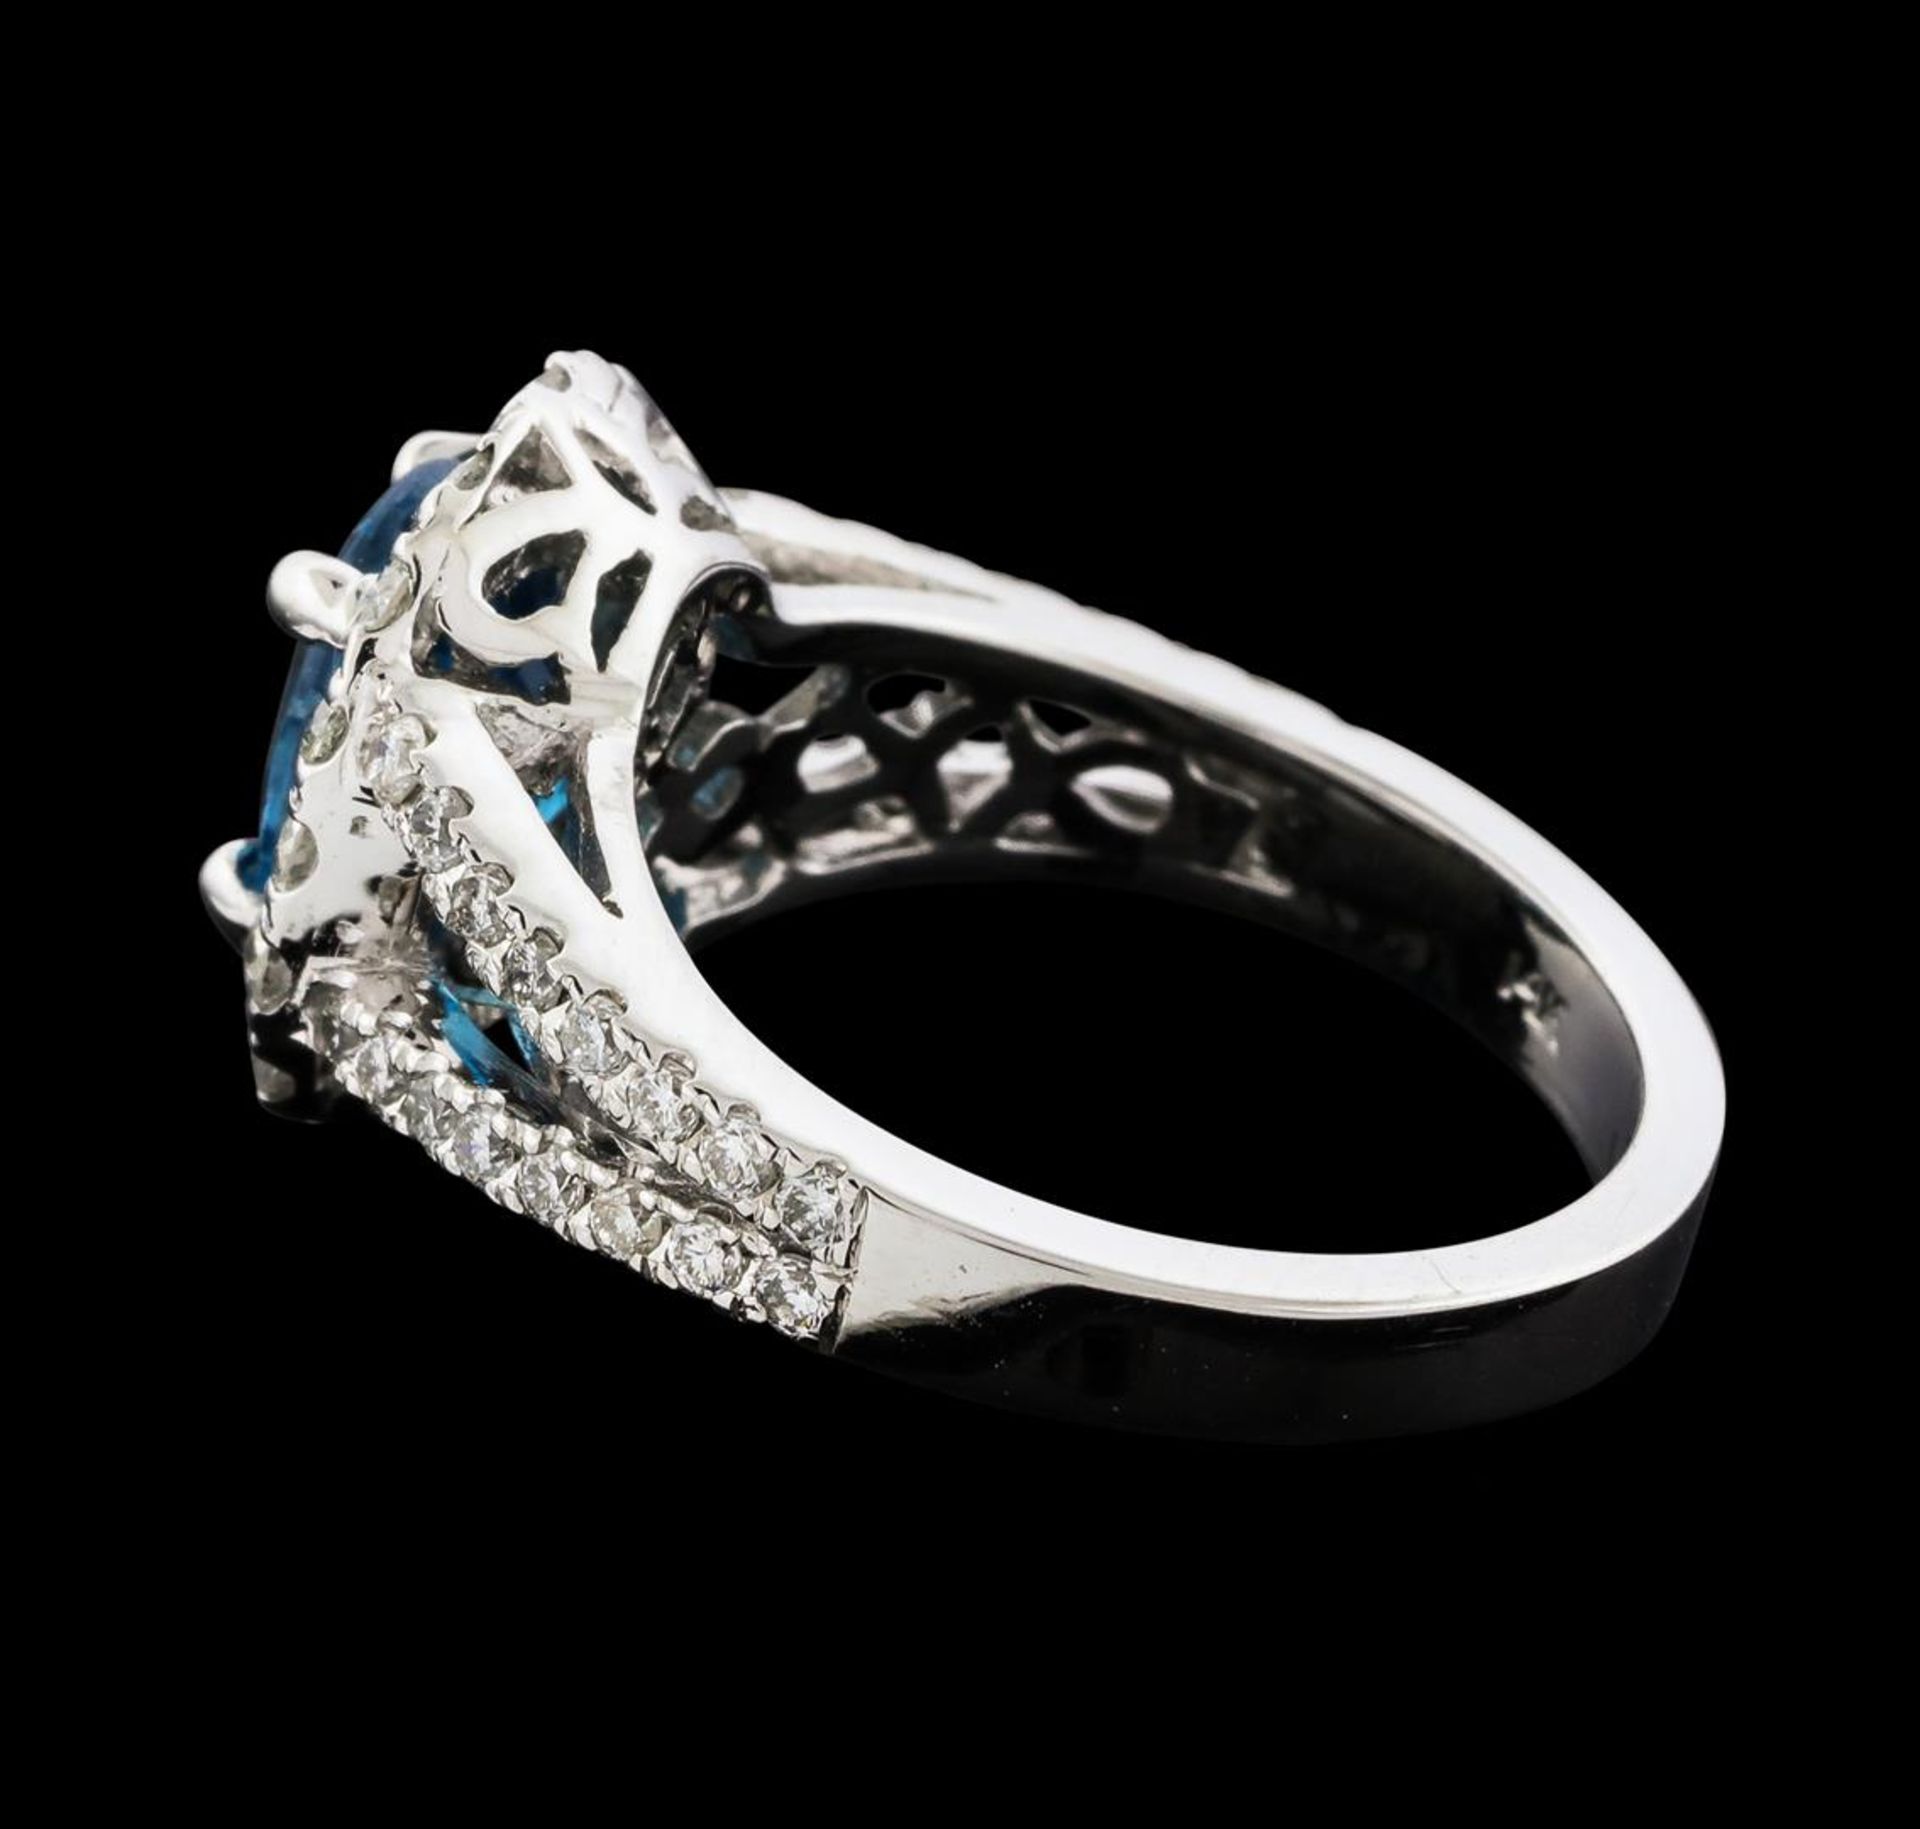 2.81 ctw Blue Zircon and Diamond Ring - 14KT White Gold - Image 3 of 5